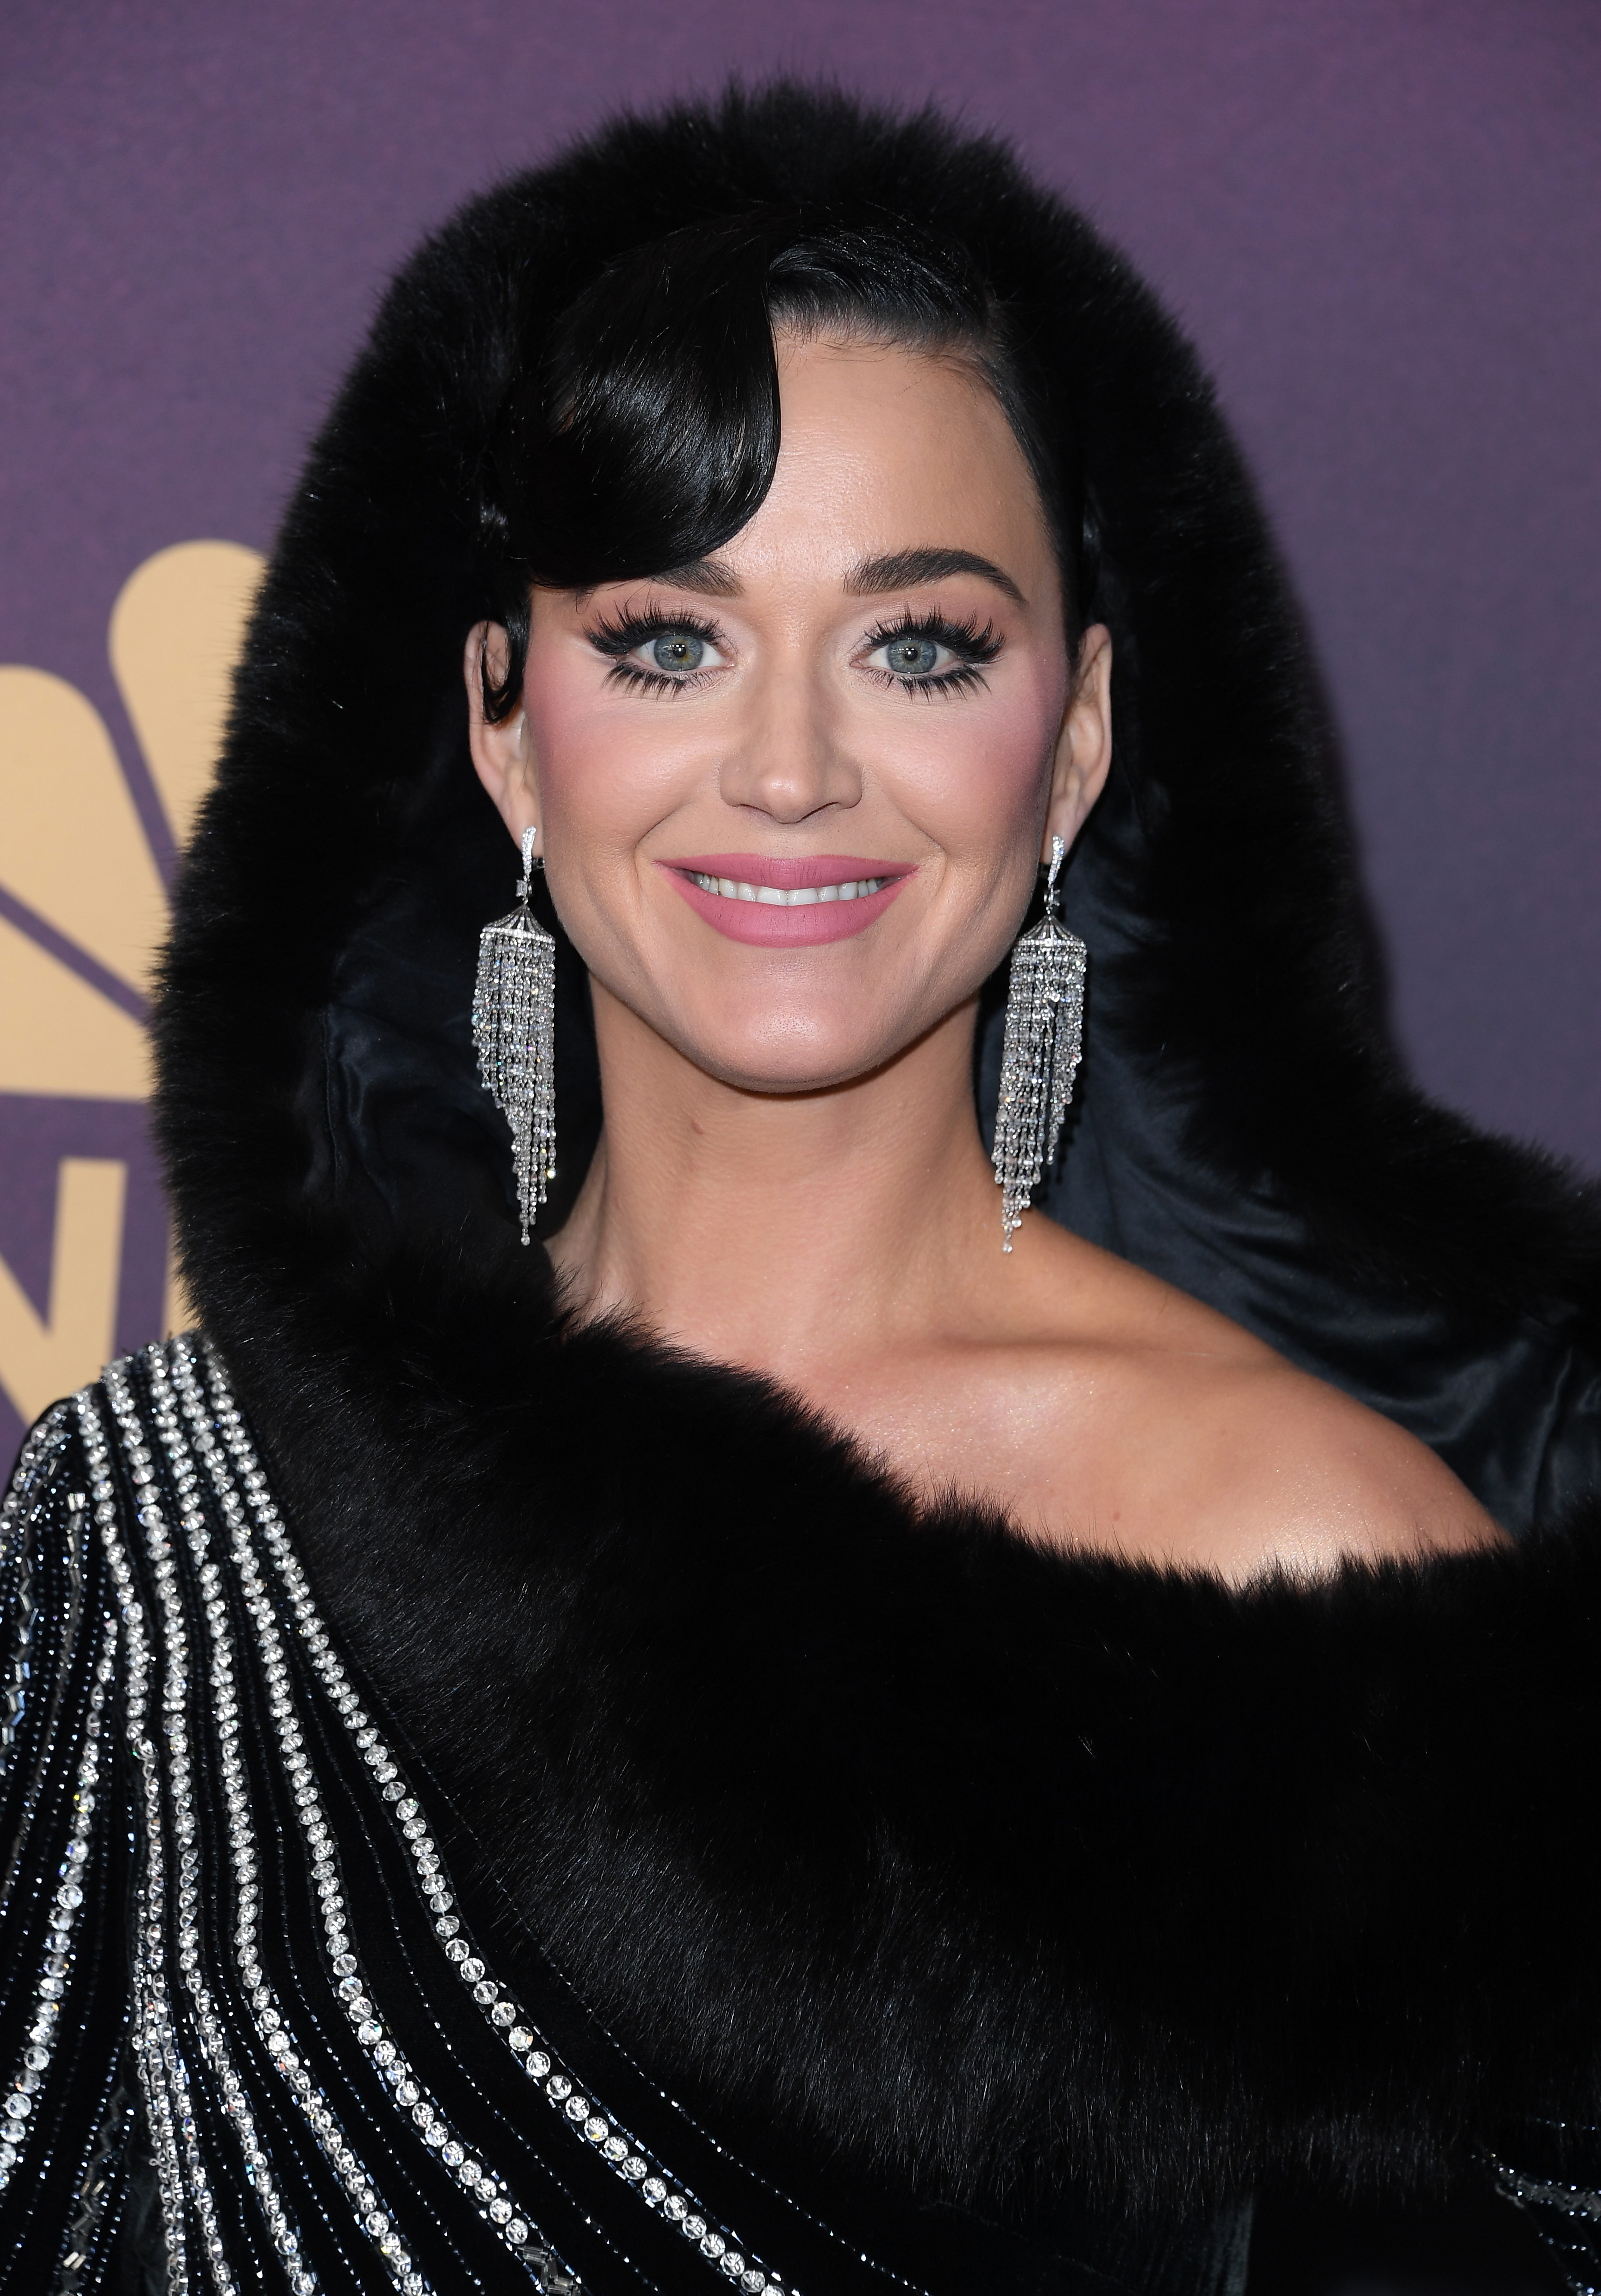 Katy Perry arrives at NBC's "Carol Burnett: 90 Years Of Laughter + Love" Birthday Special at Avalon Hollywood & Bardot on March 2, 2023, in Los Angeles, California. | Source: Getty Images